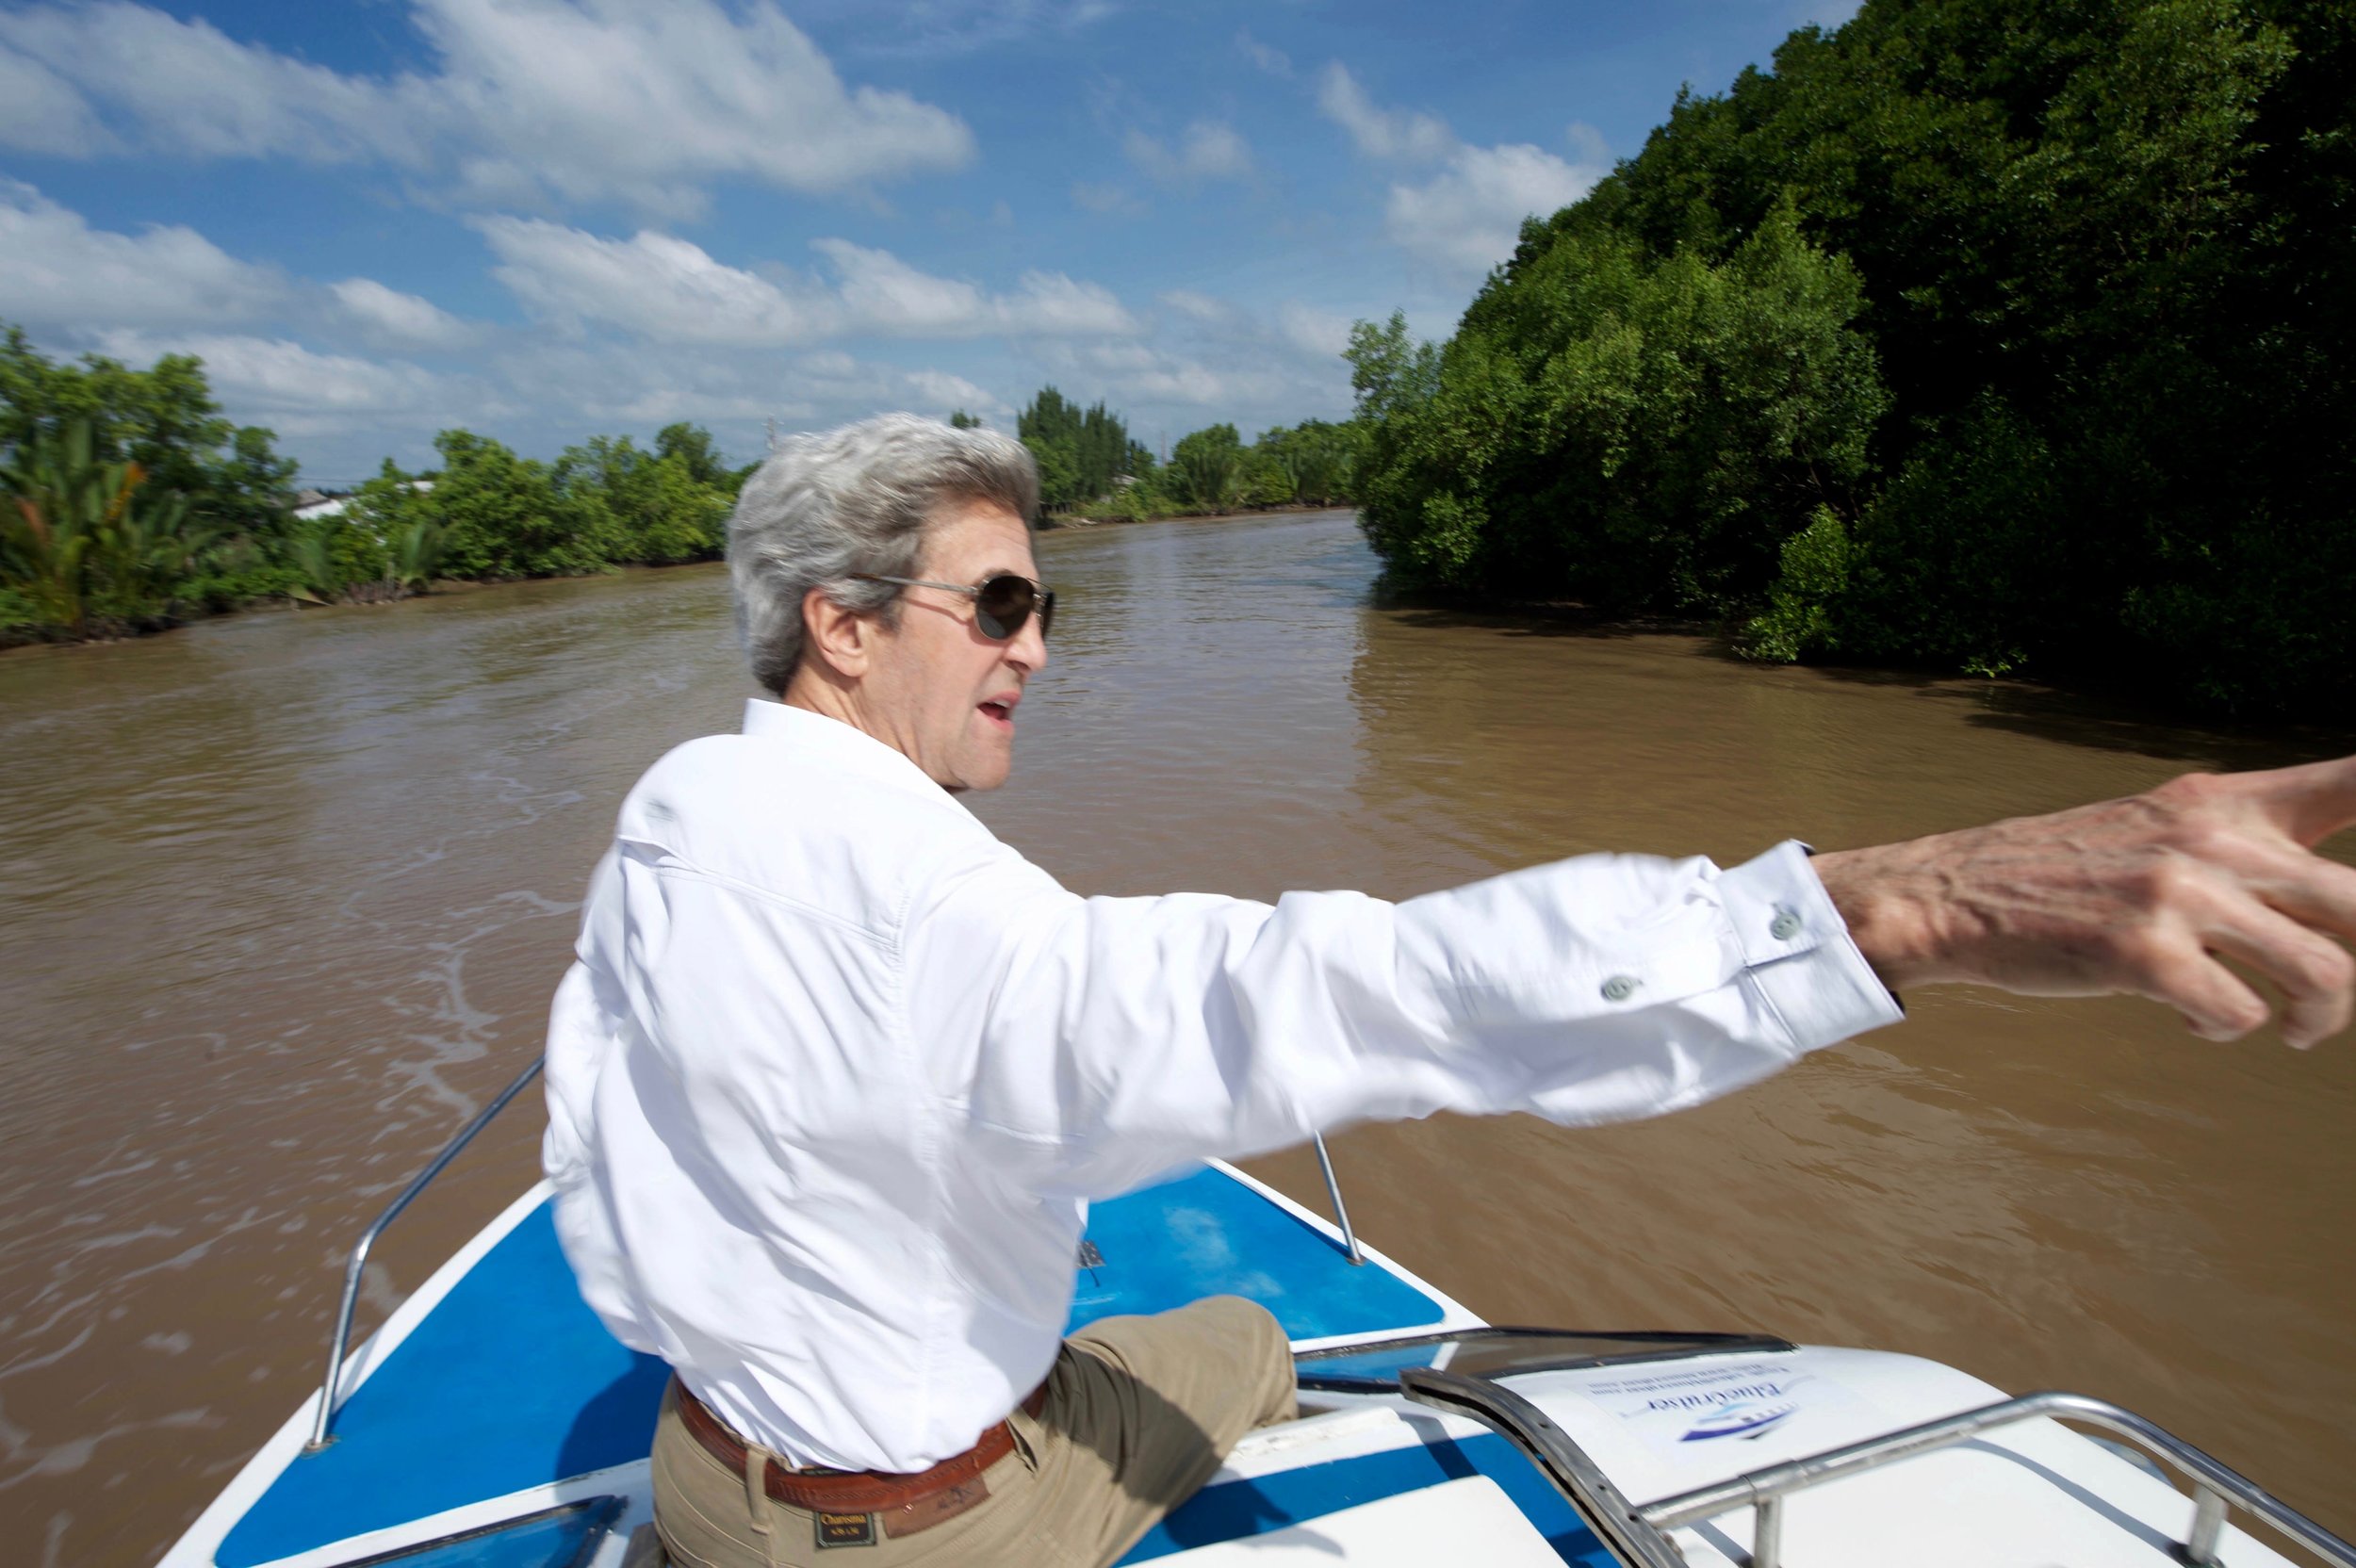  Secretary Kerry finds the spot where he beached his Swift Boat and killed a Viet Cong soldier in an episode later derided during the 2004 presidential campaign. 